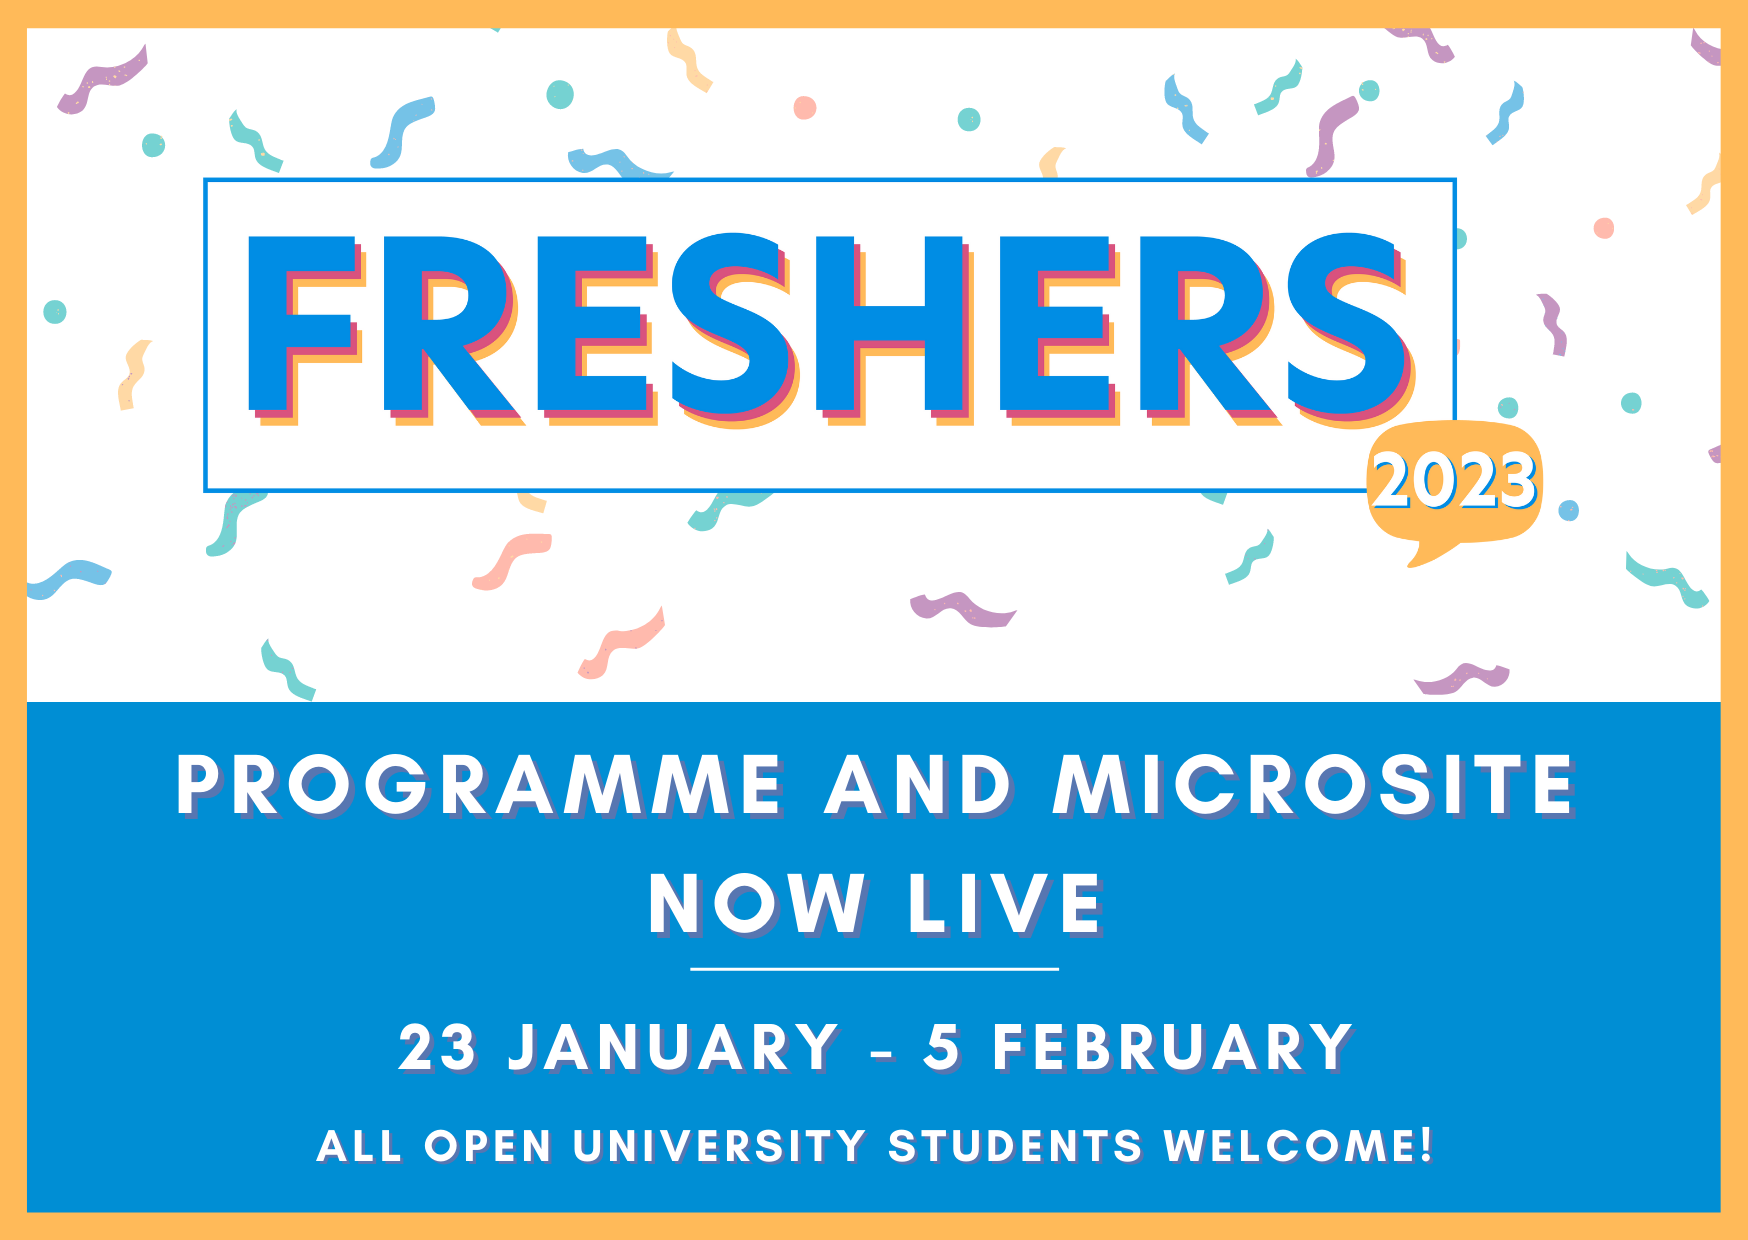 Freshers microsite and programme released. All OU students welcome.